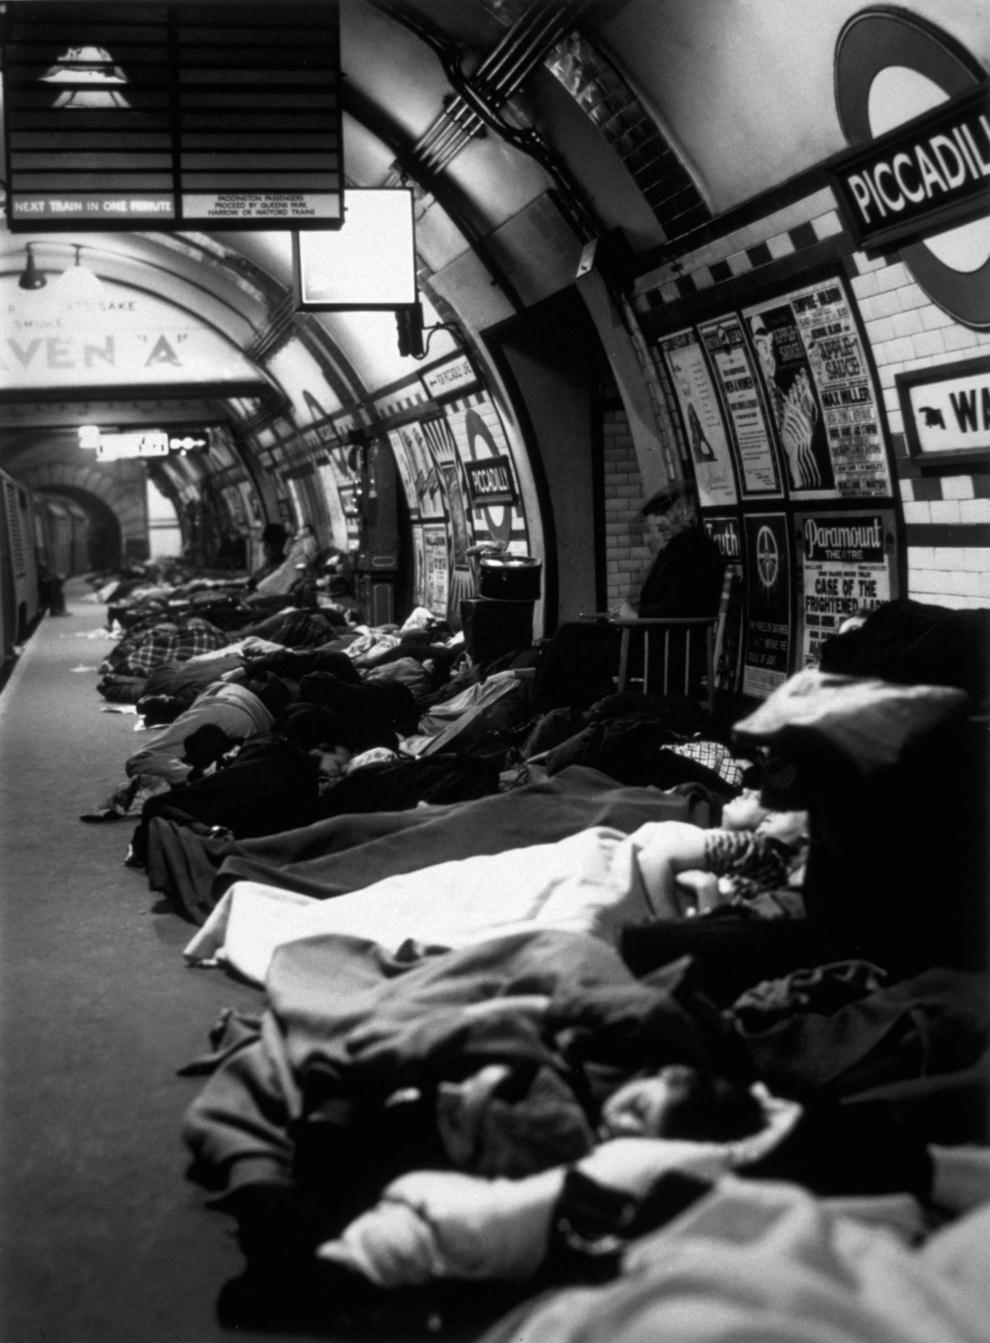 People asleep on the platform at Piccadilly Tube Station, London during an air raid, 1940.